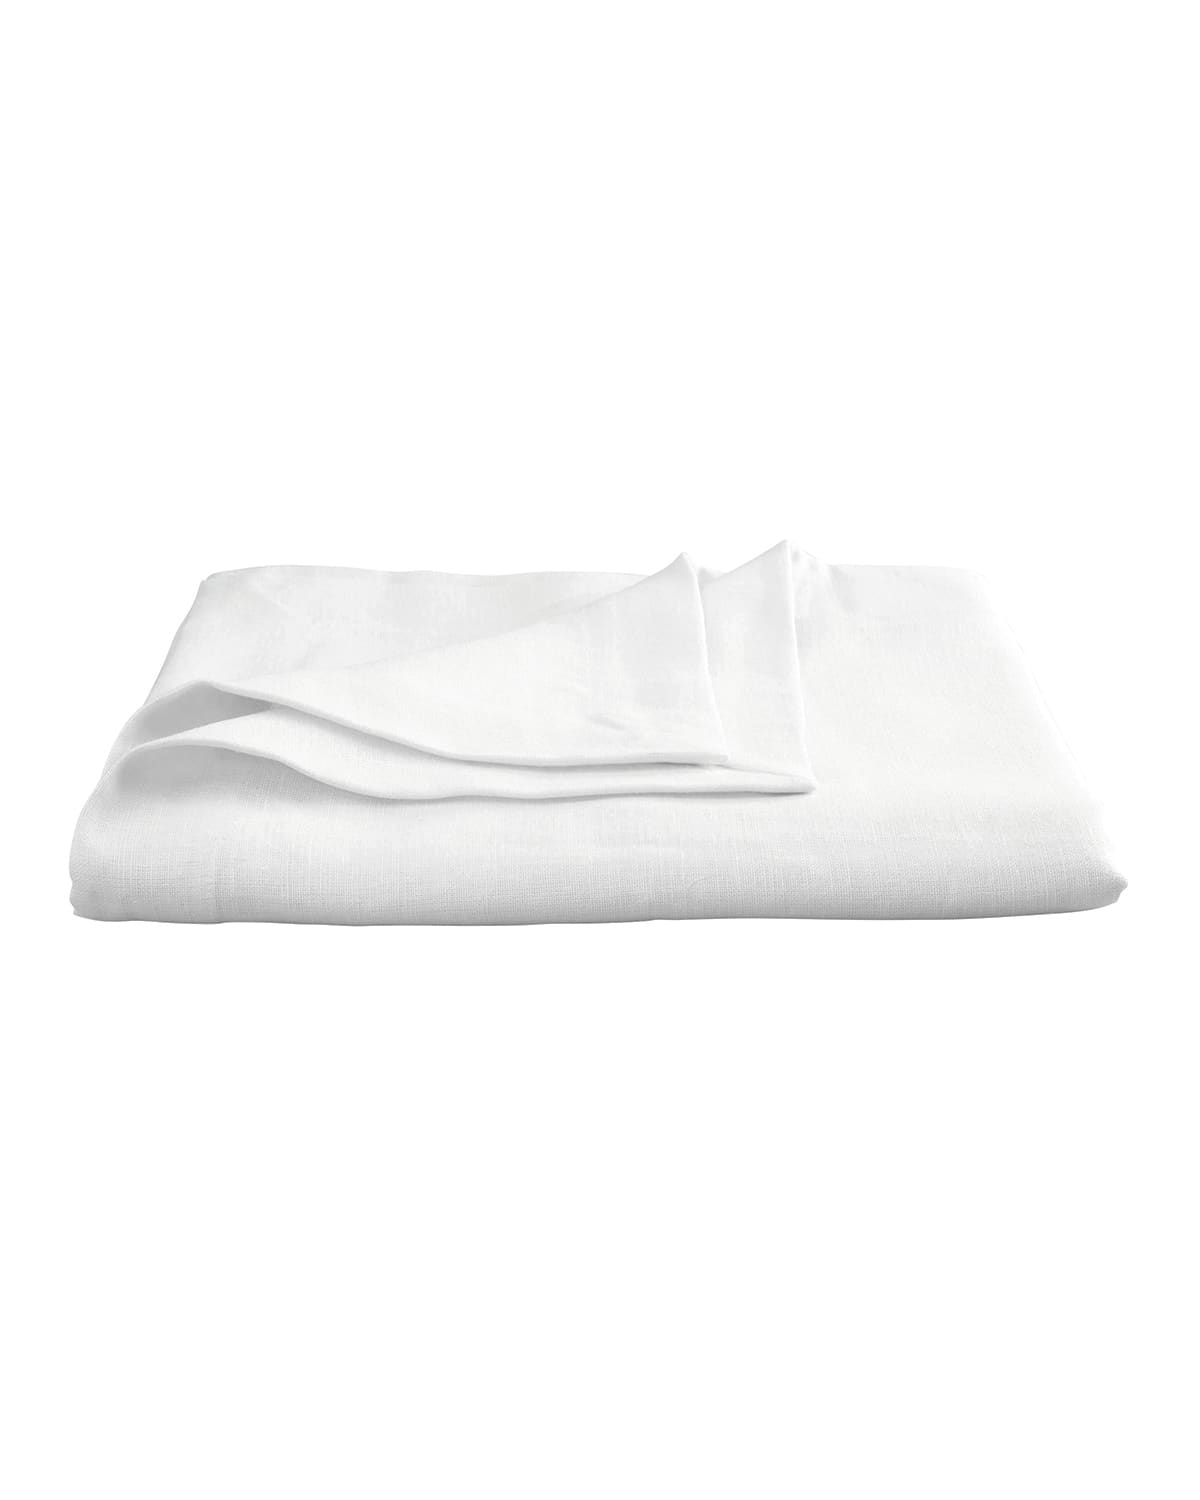 Shop Matouk Chamant Tablecloth, 90"dia. In White